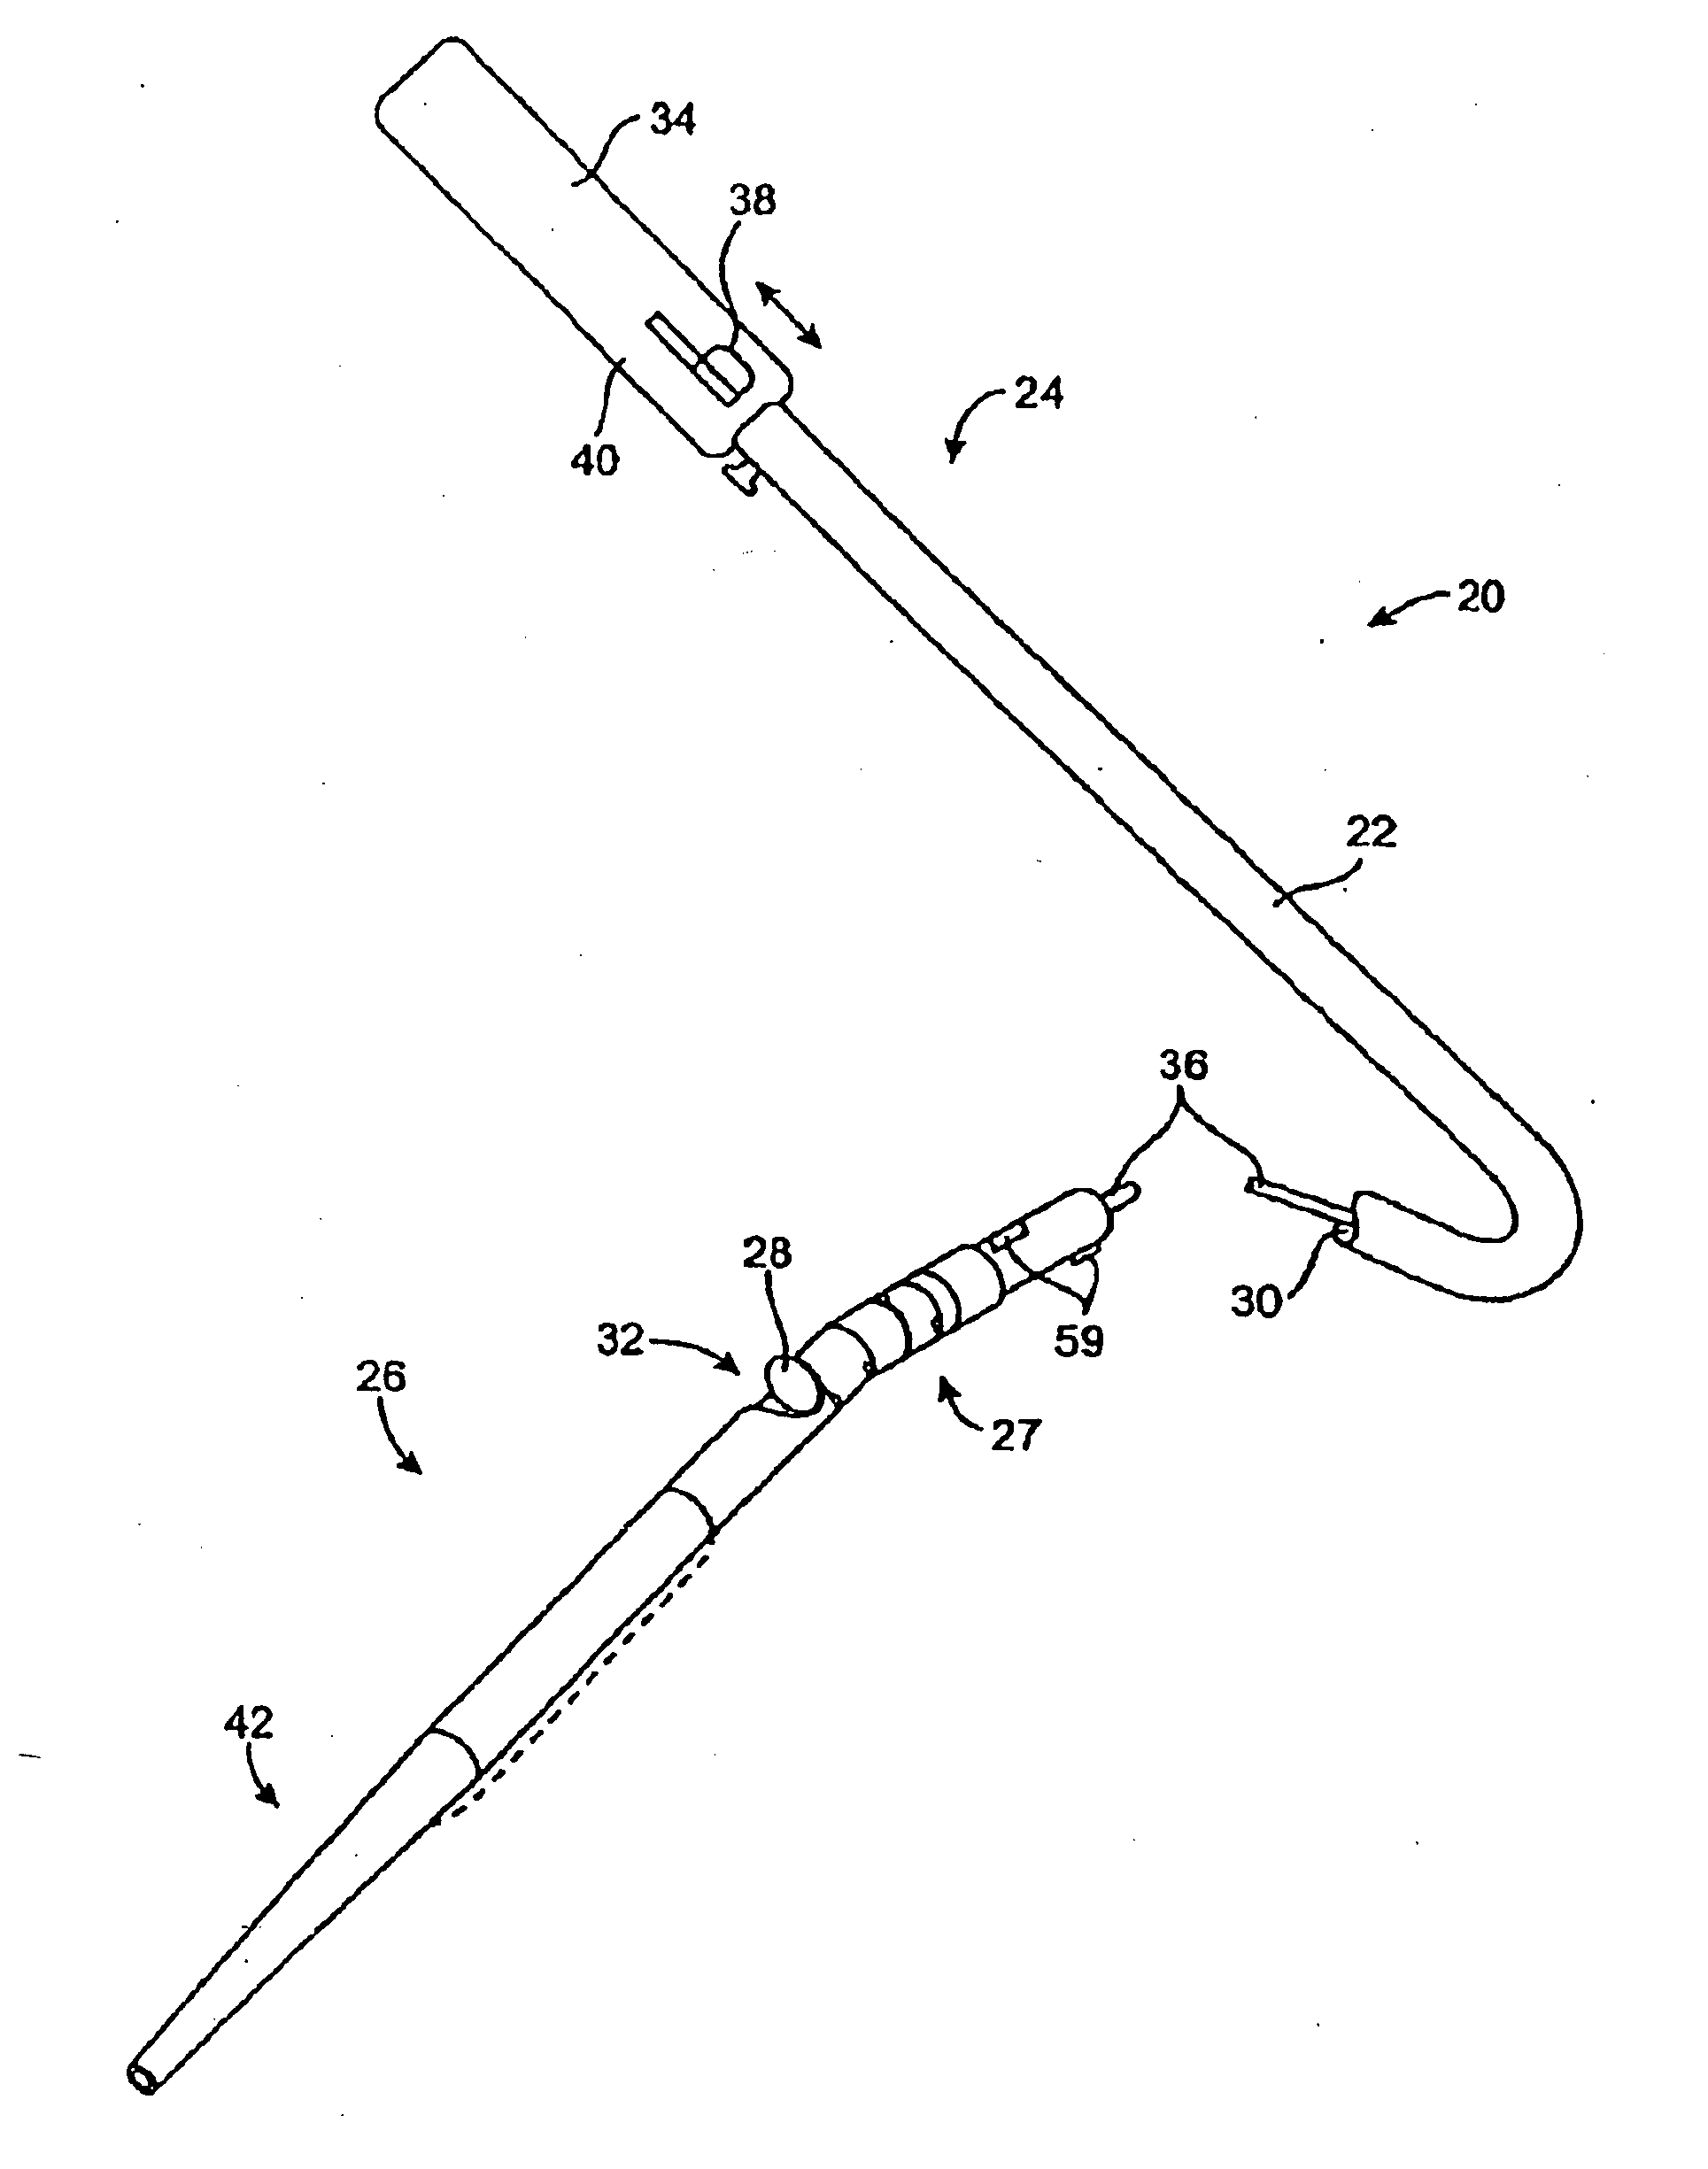 Method of evaluating a treatment for vascular disease